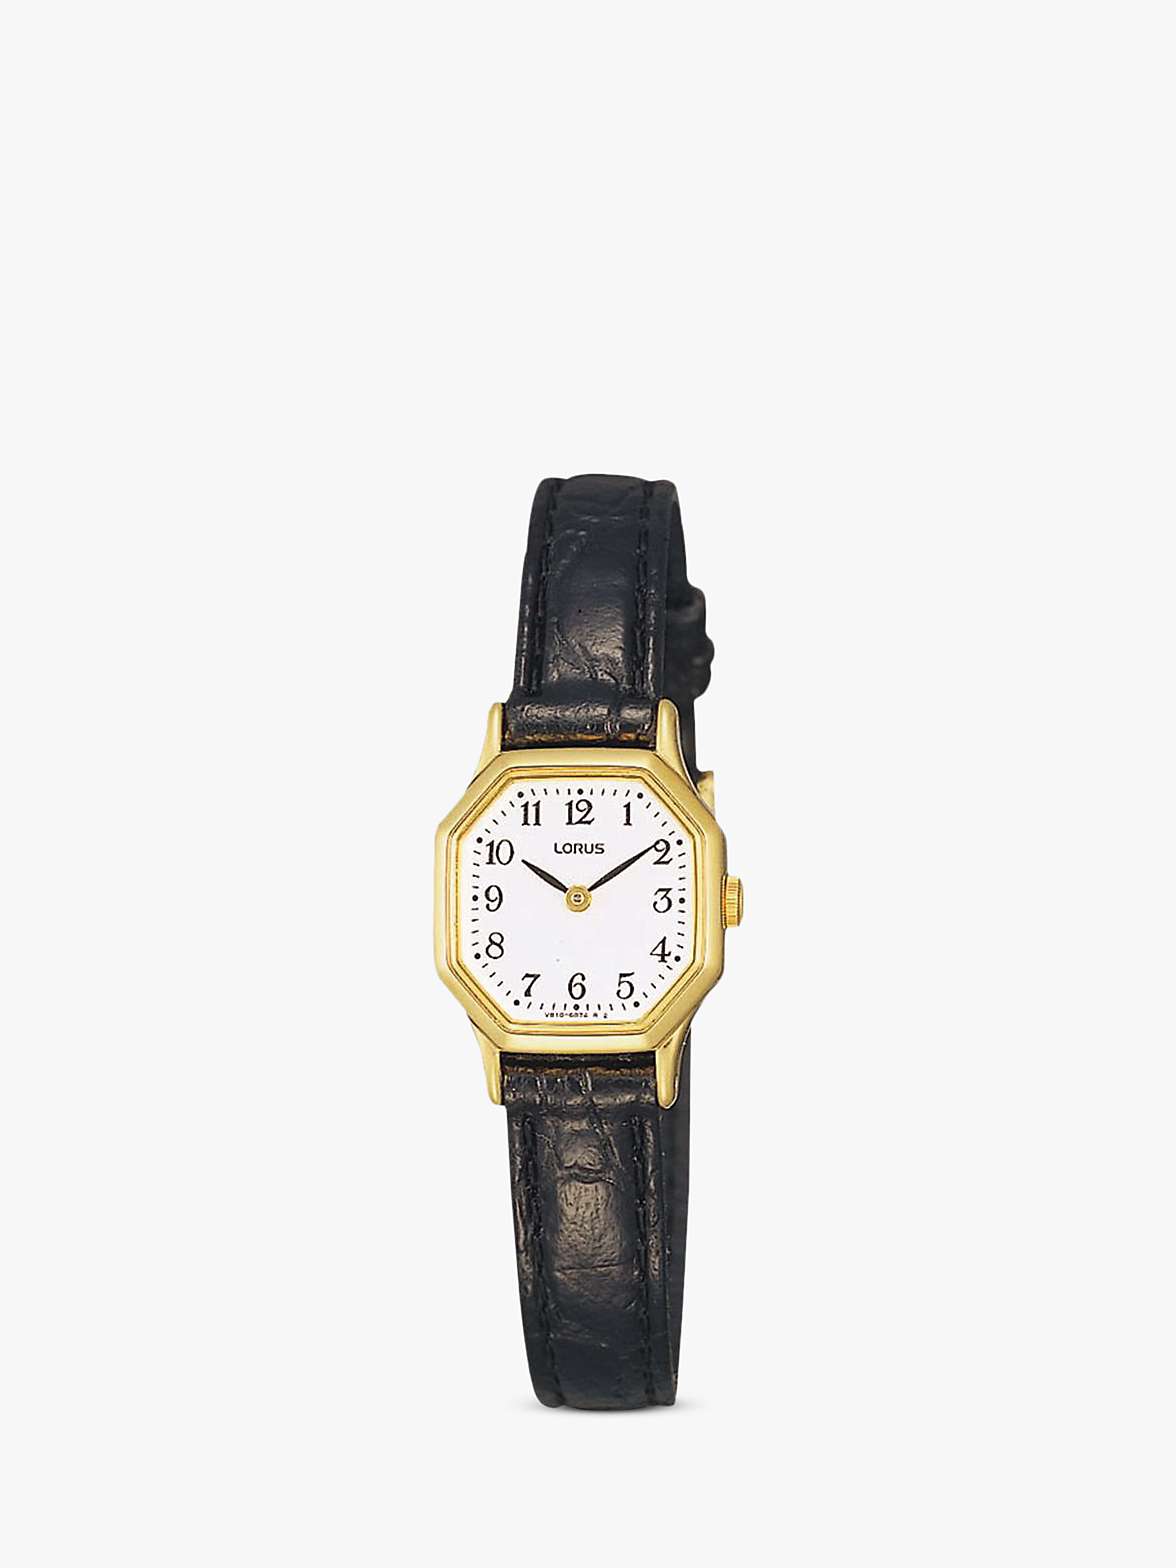 Buy Lorus Women's Octagonal Dial Leather Strap Watch Online at johnlewis.com